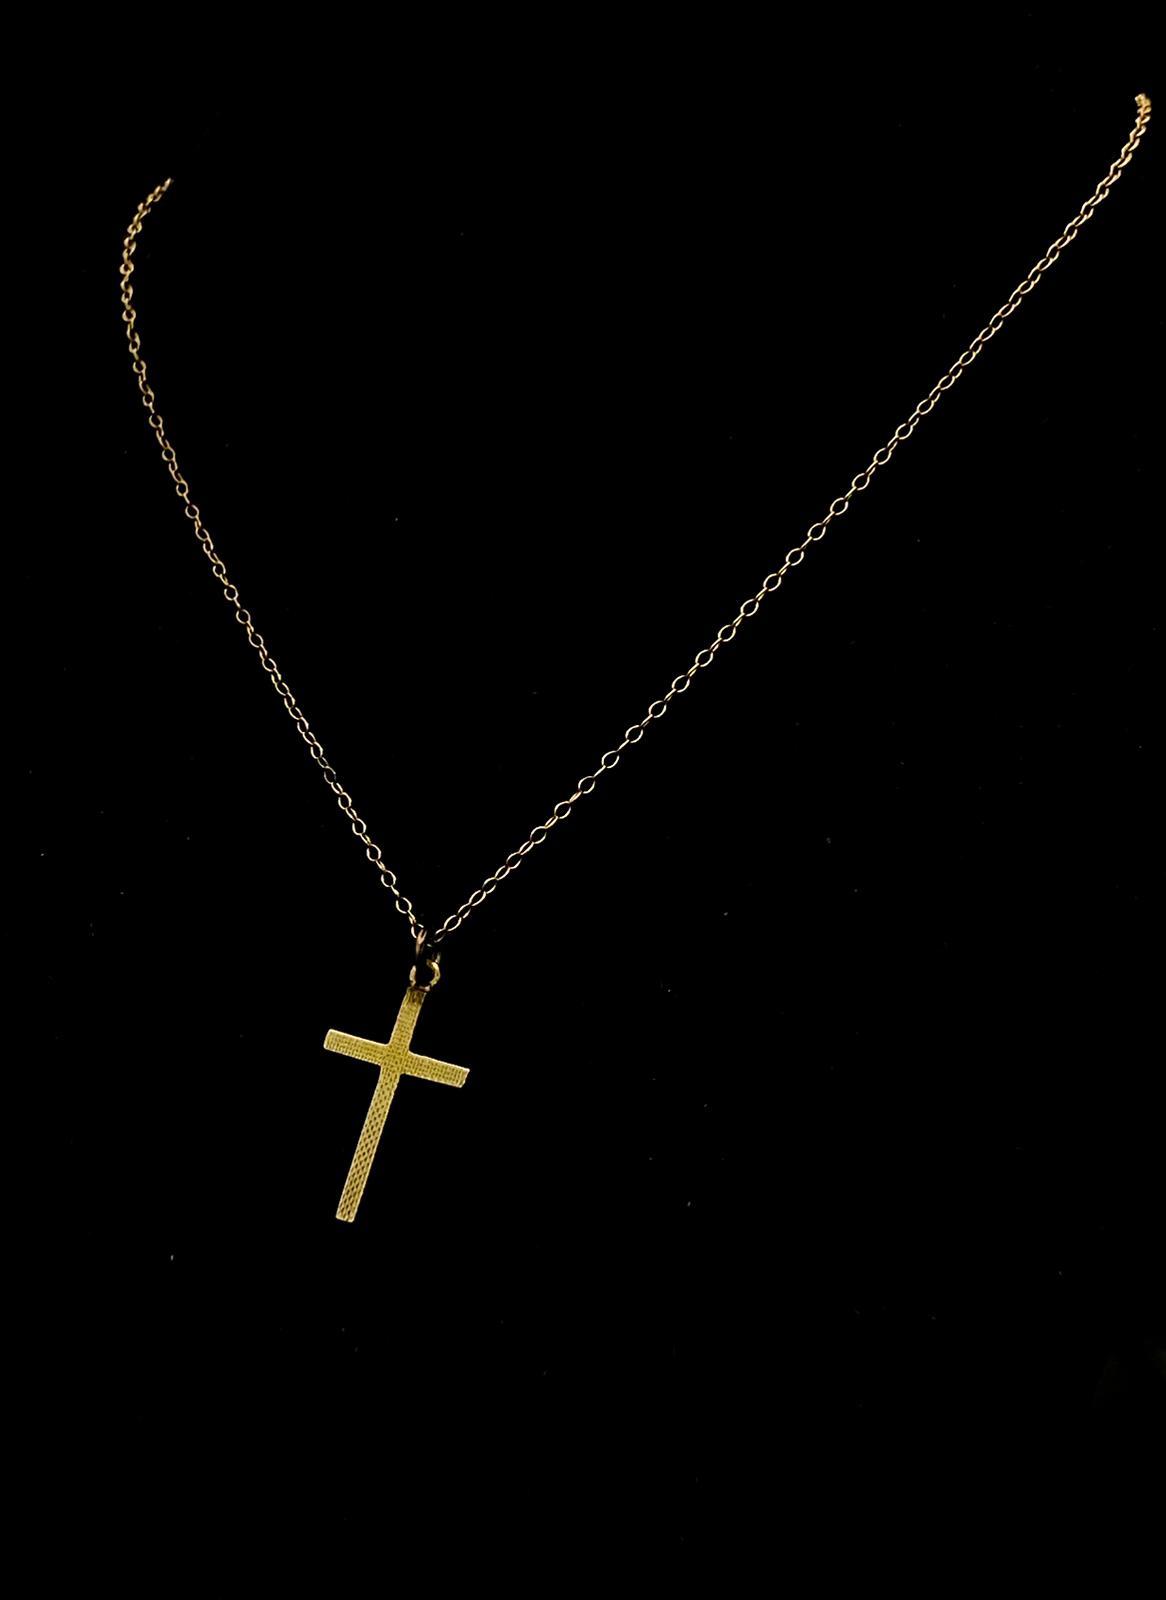 9k yellow gold patterned cross with matching 18"" belcher chain Weight: 2.9g - Image 2 of 5